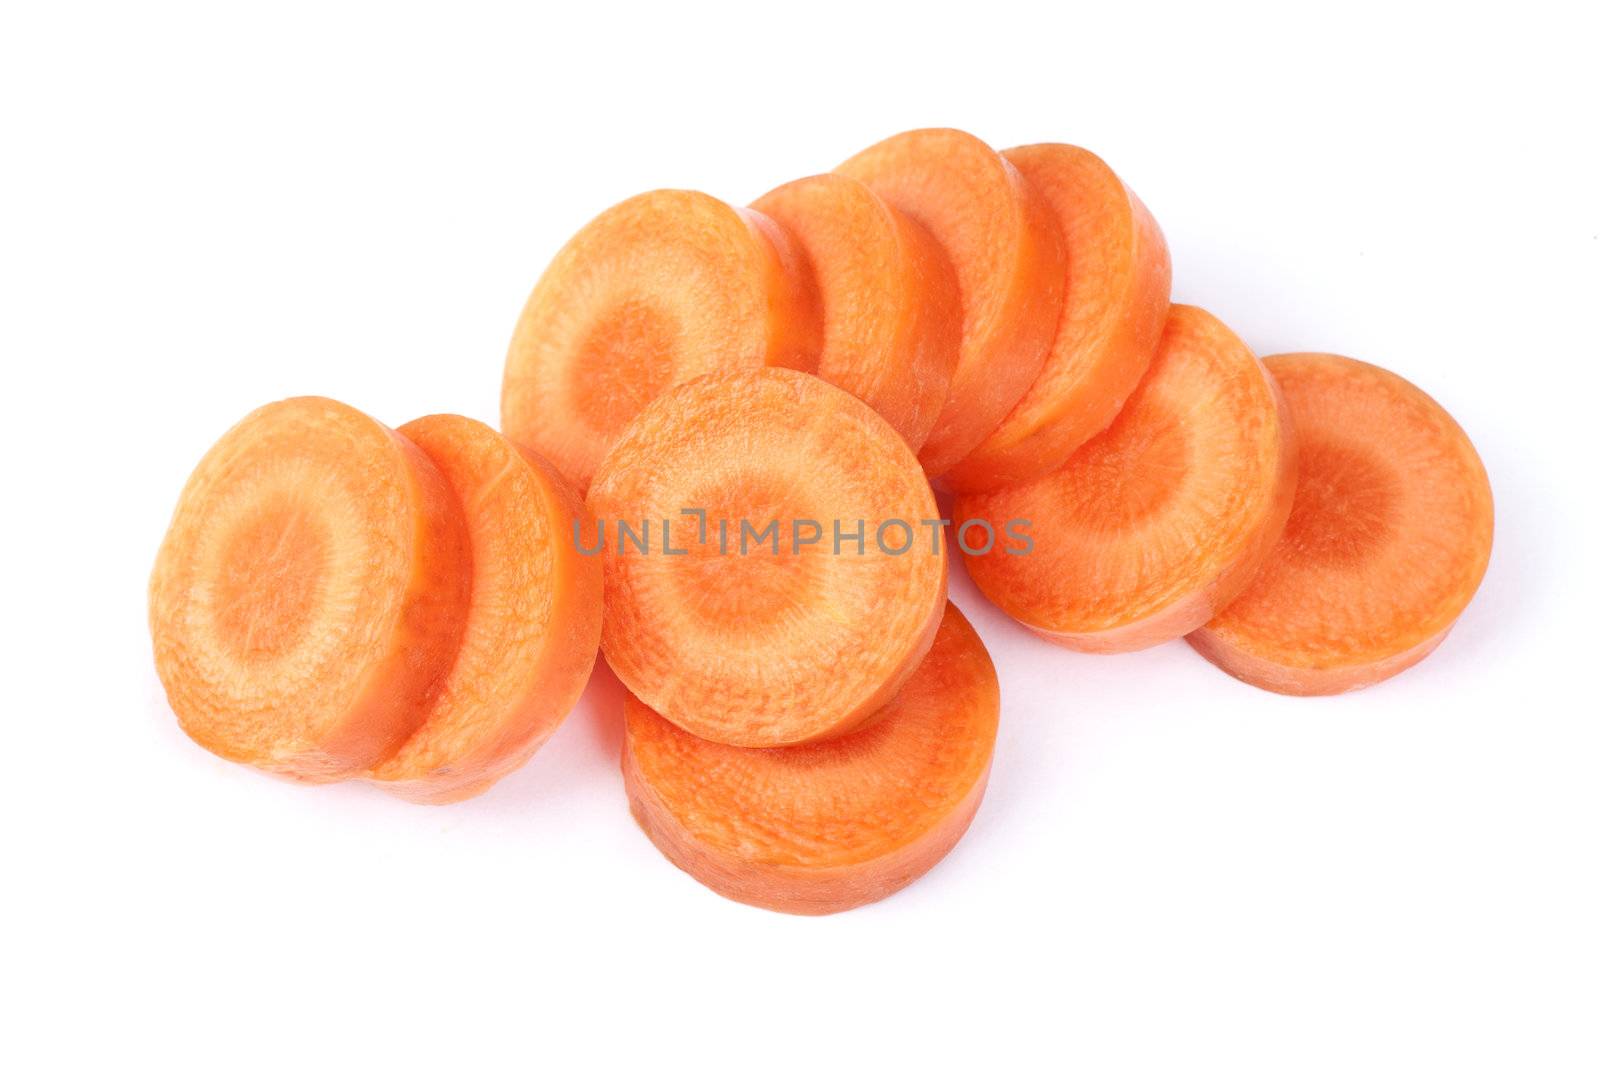 Ripe and juicy chopped carrot on white background